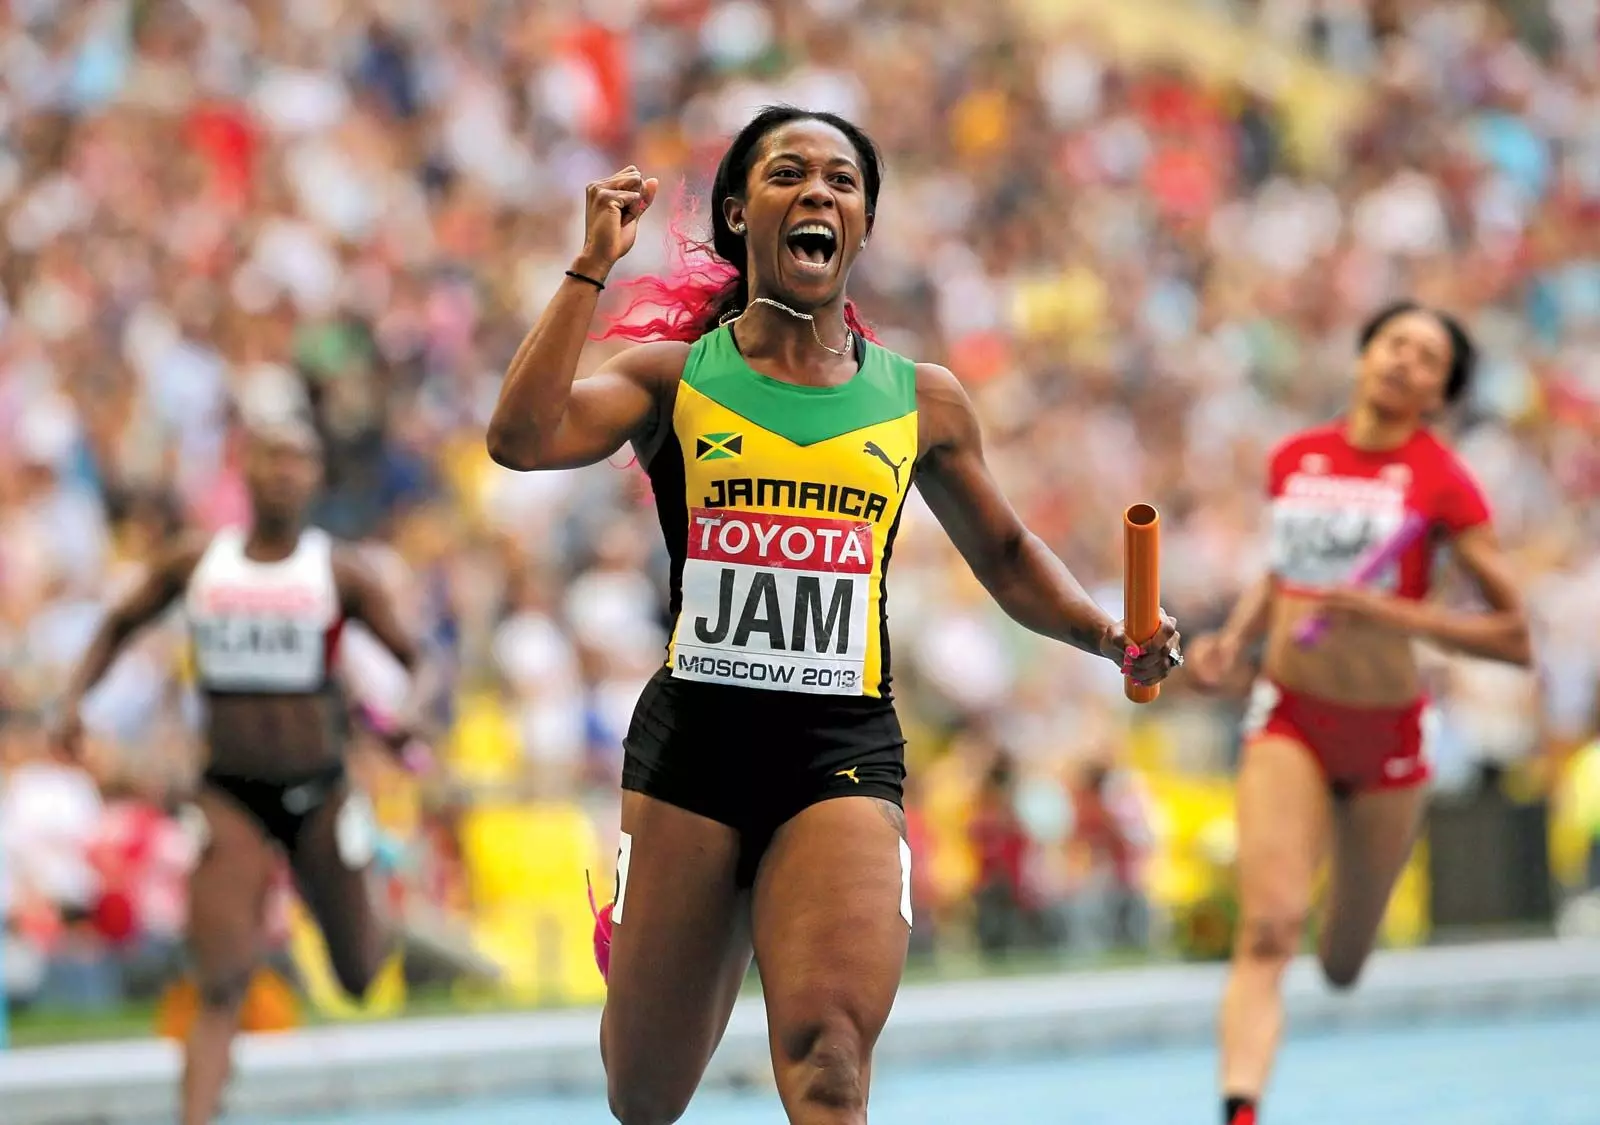 The likes of Shelly-Ann Fraser-Pryce would be the favourite to win the shortest distance sprint [Source: AP Images]